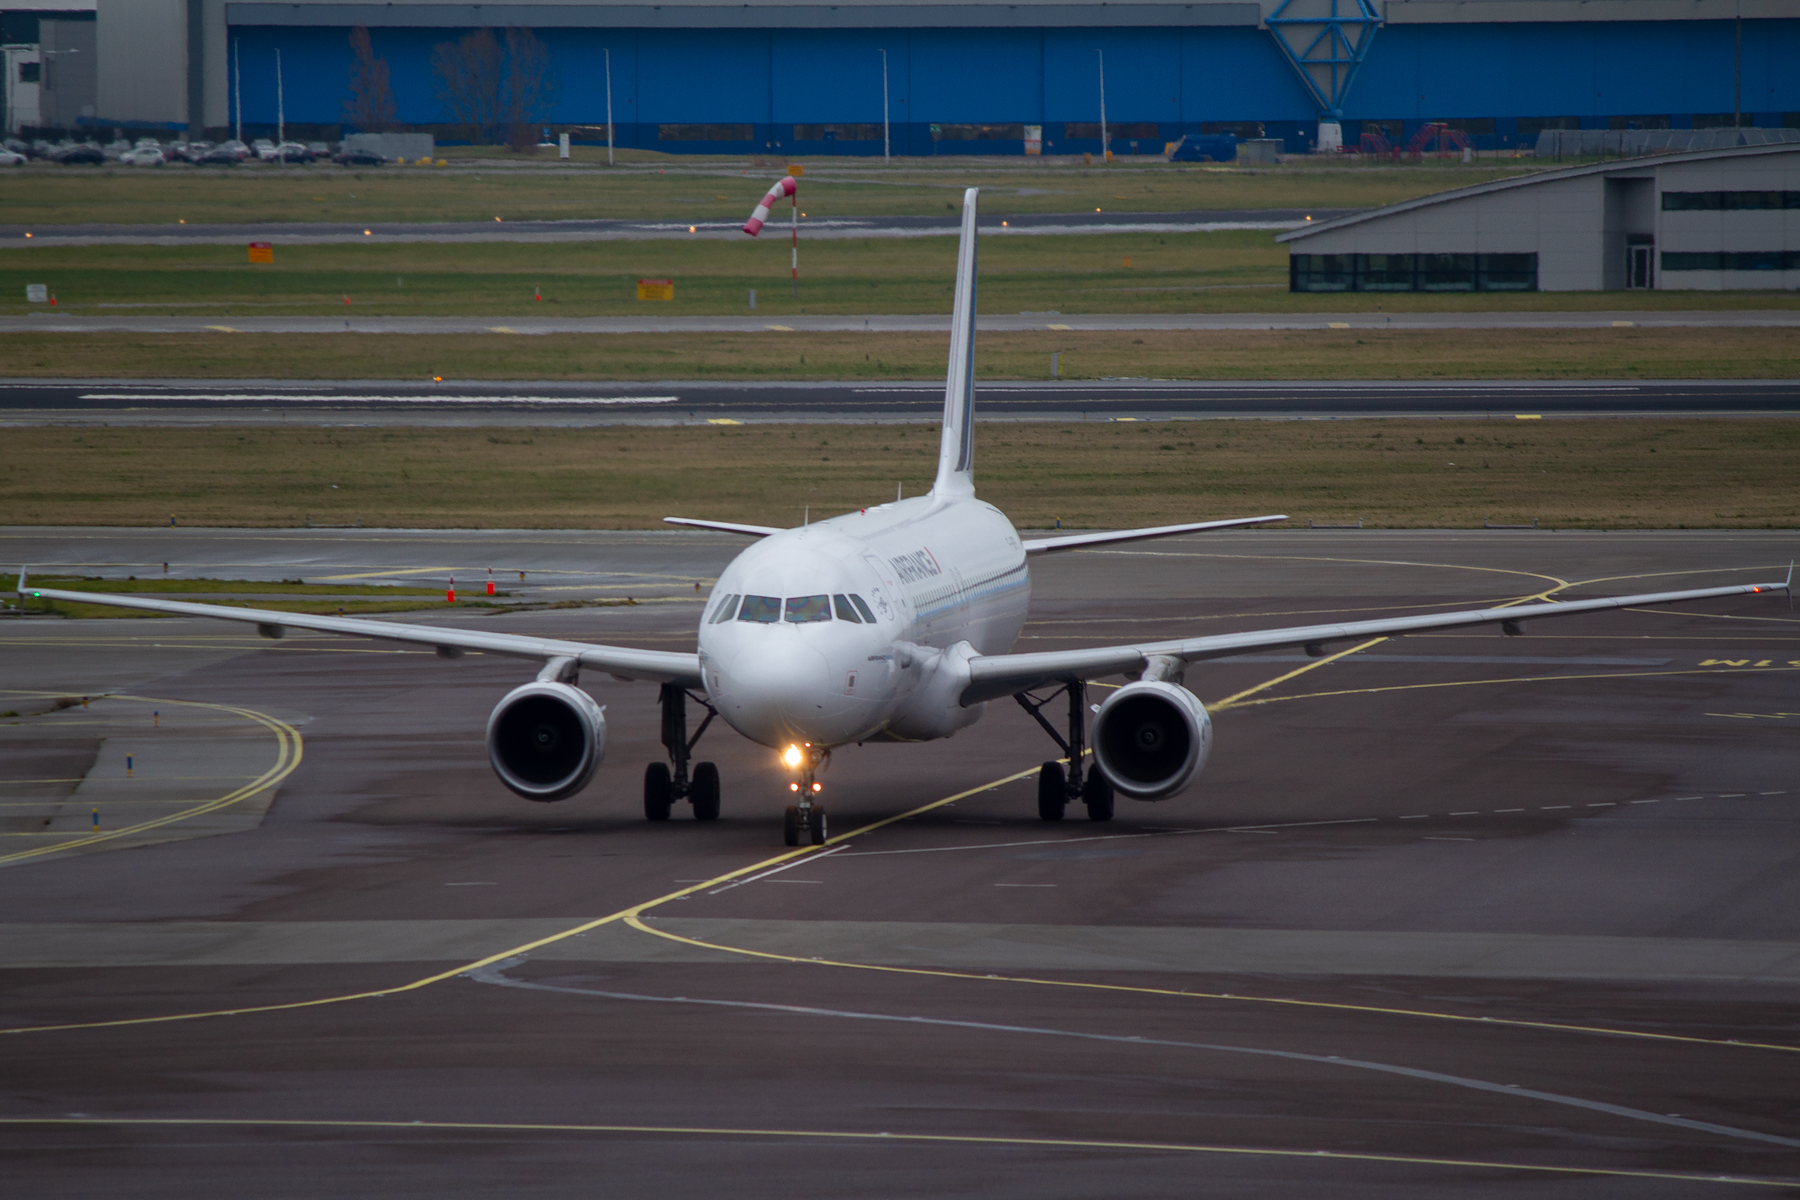 Air France Airbus A320-200 F-HEPB at Schiphol